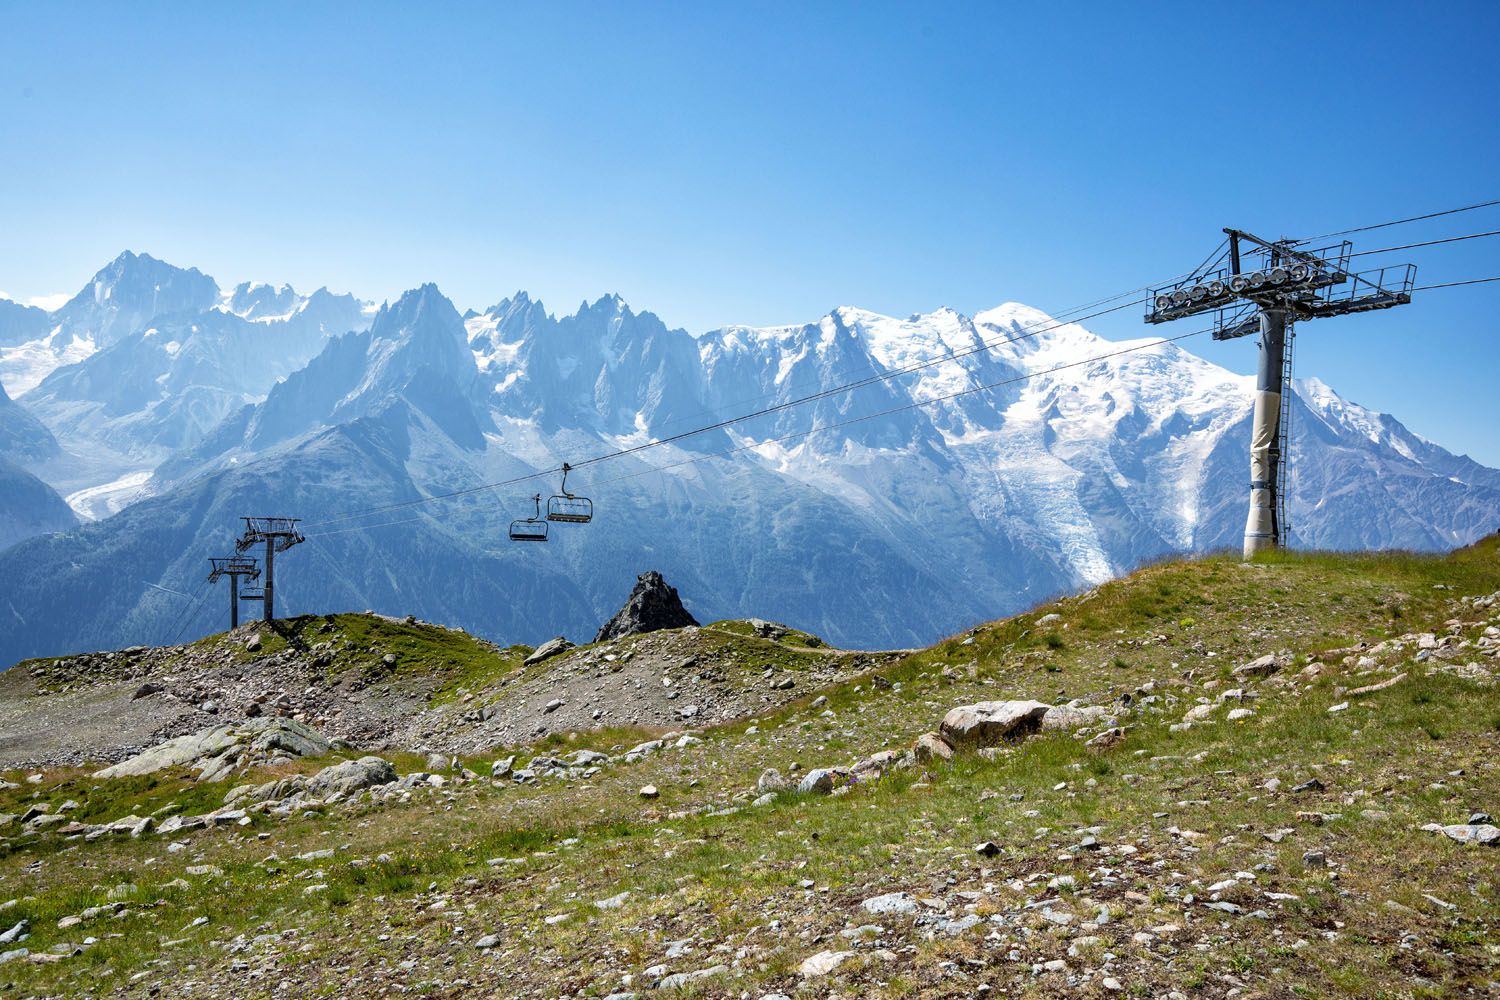 LIndex Chairlift | Best Things to Do in Chamonix